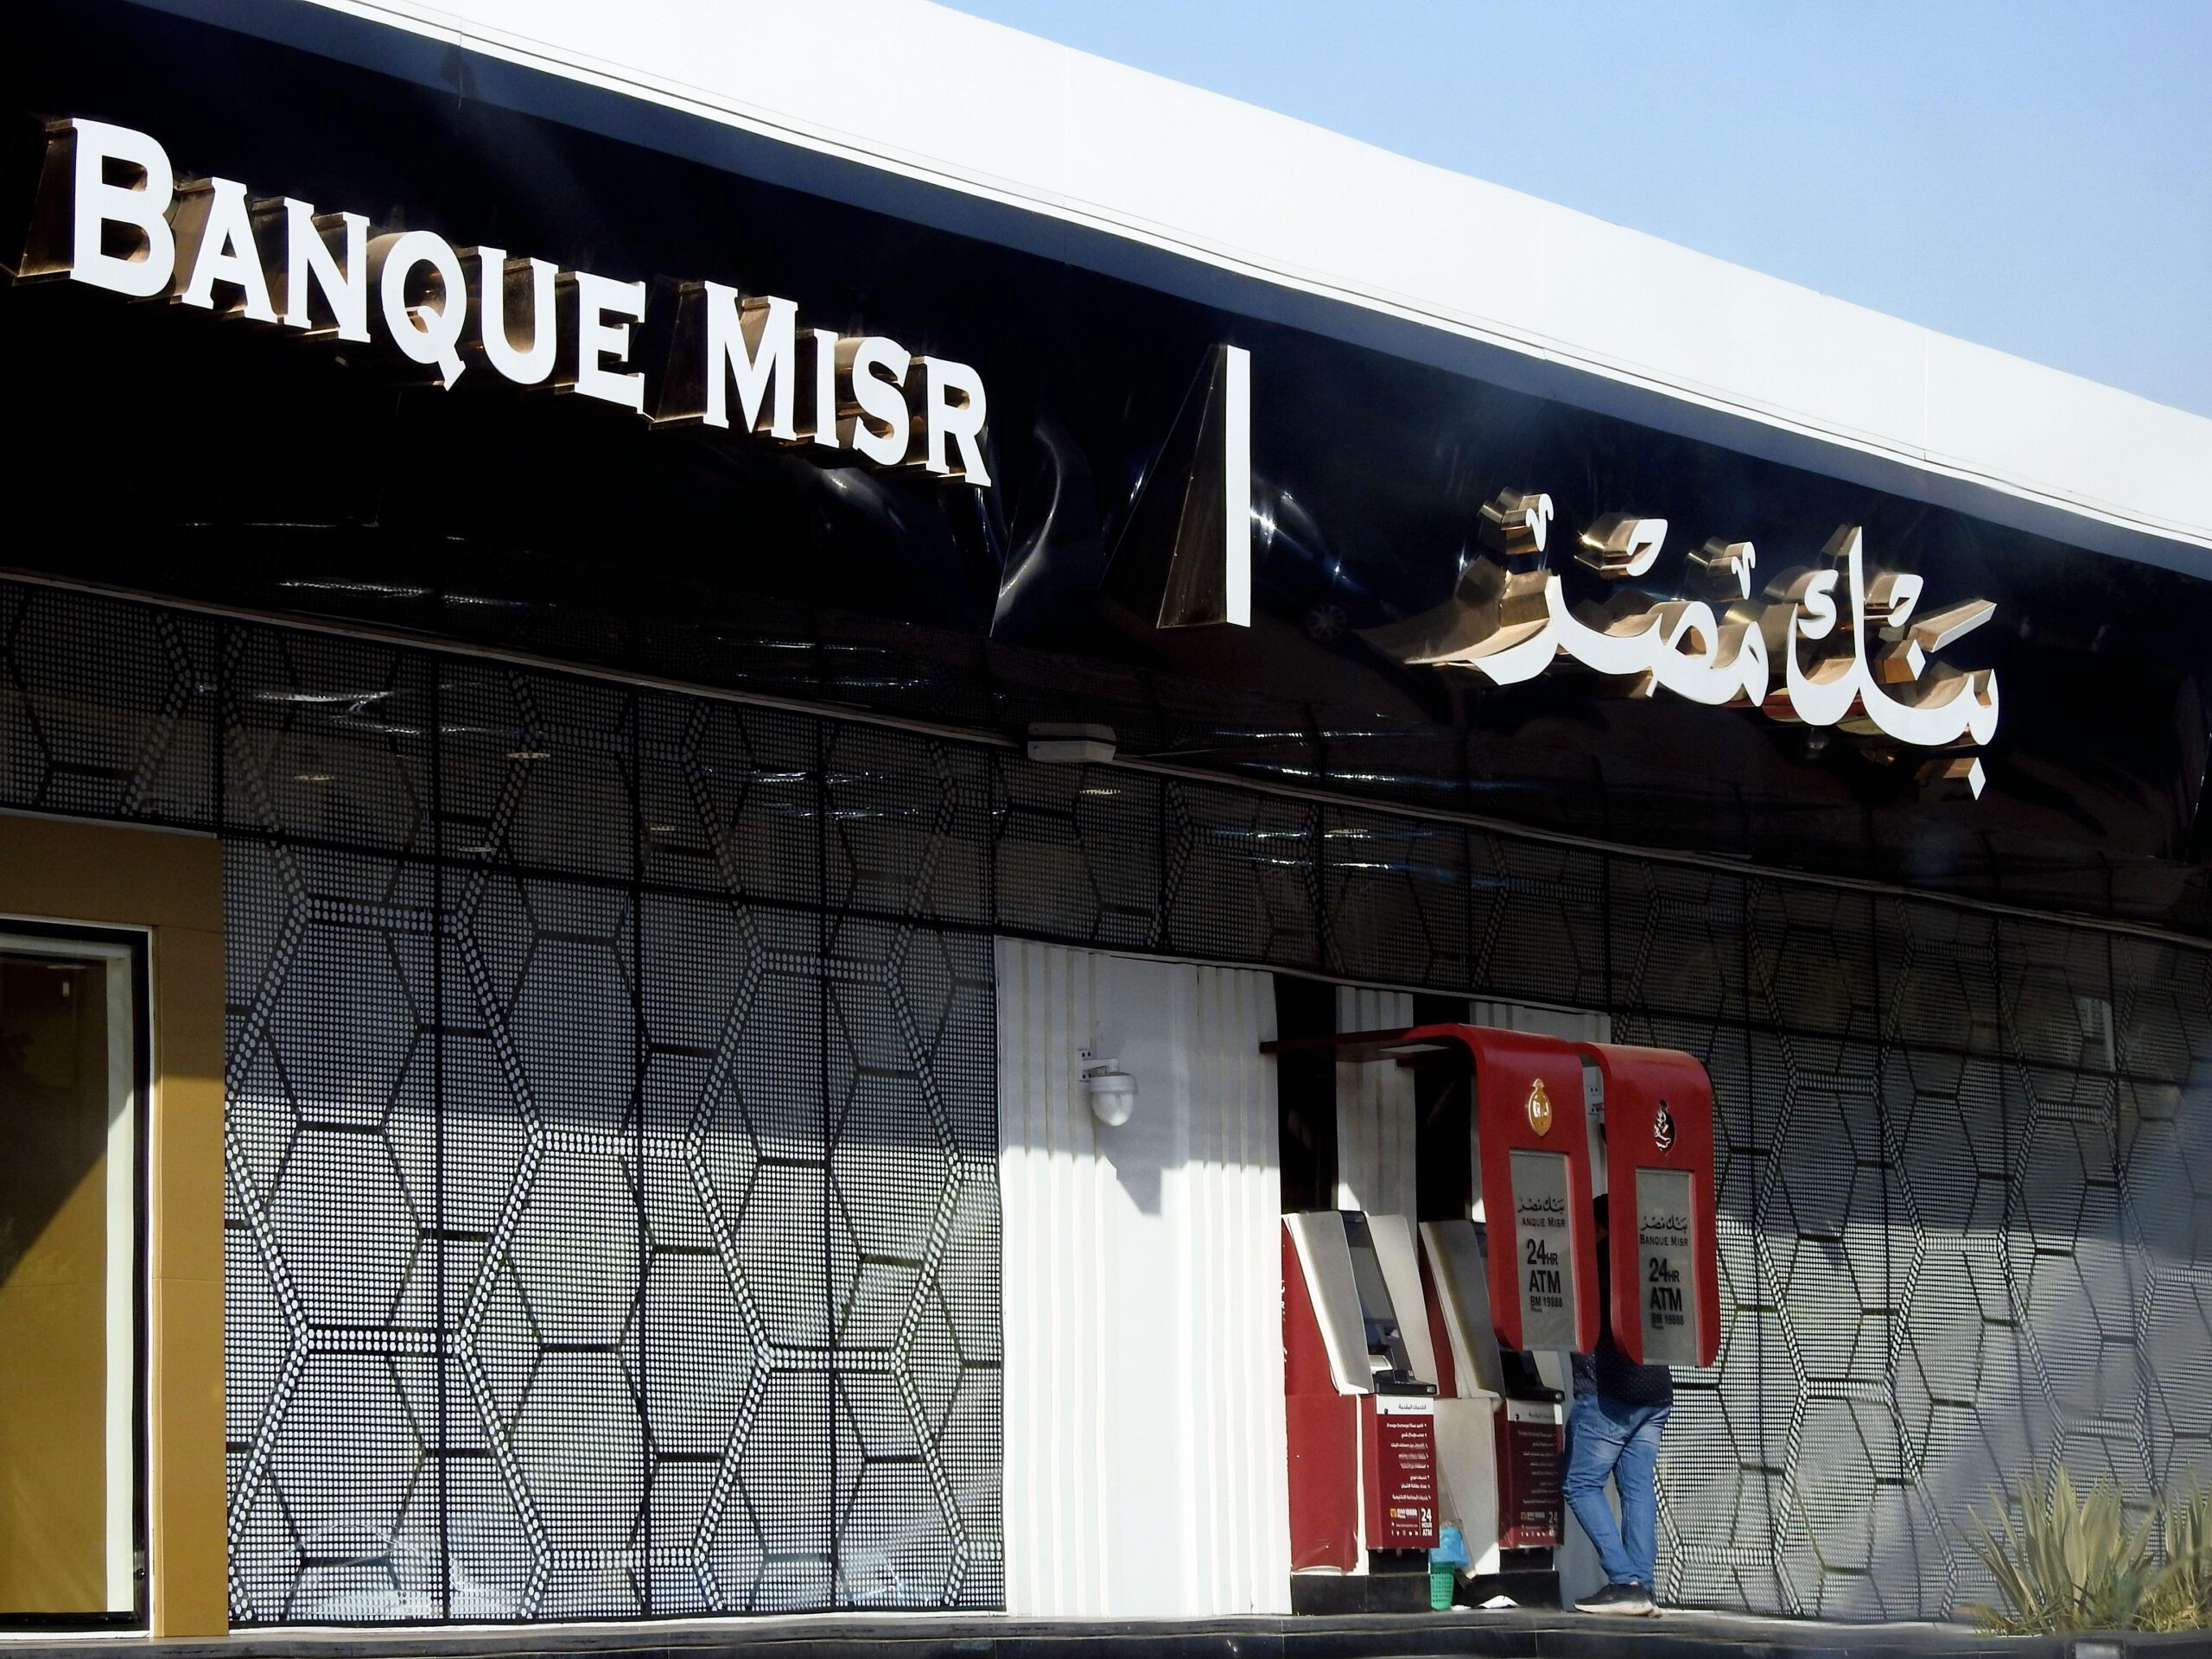 Banque Misr subsidiary MDI has to persuade clients that online banking is safe